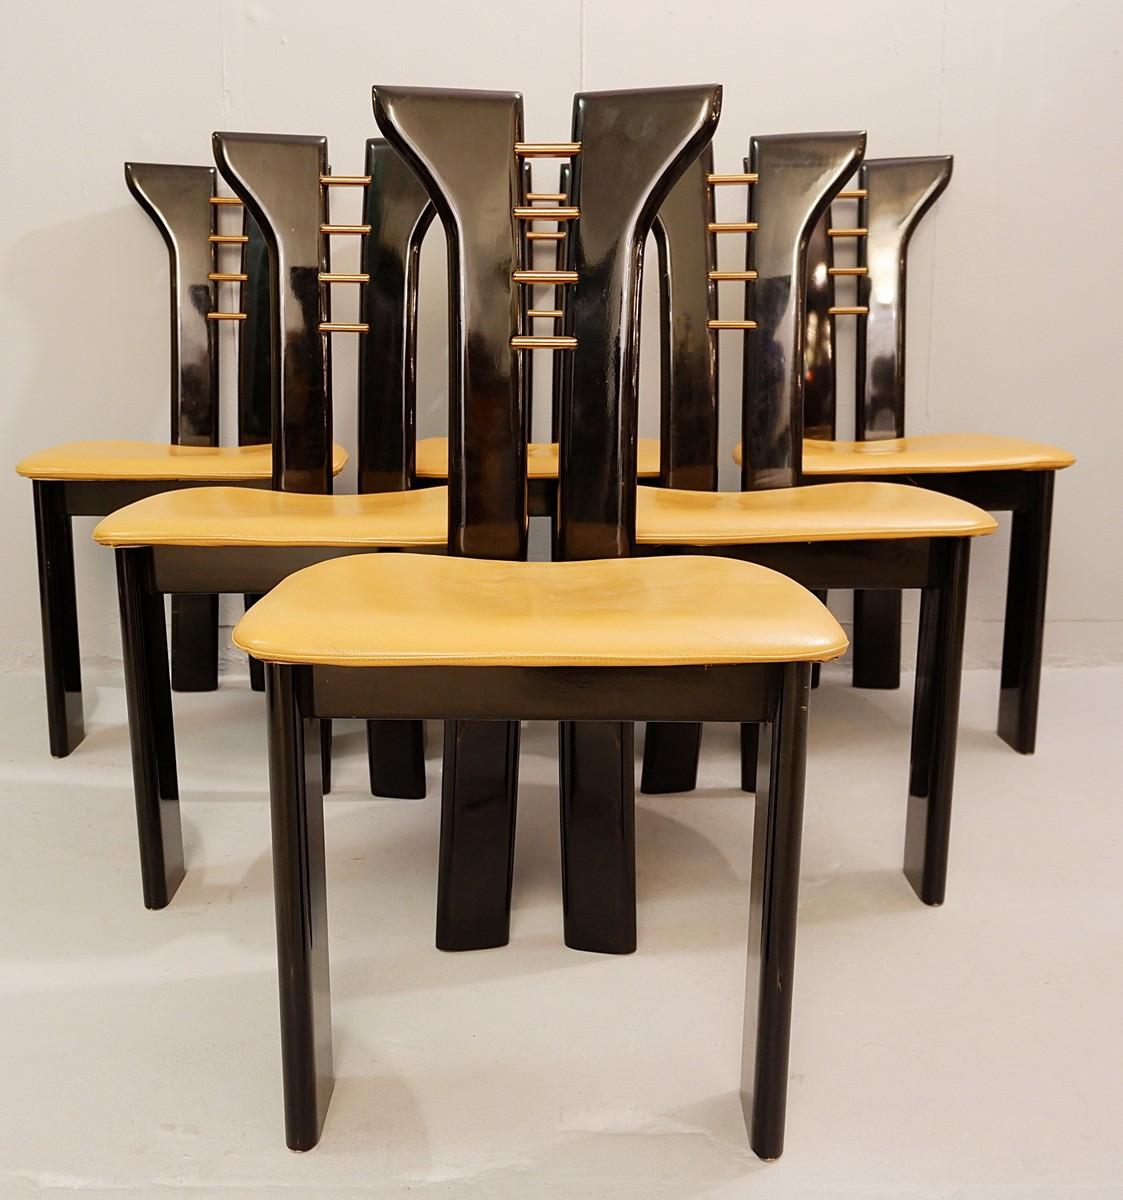 Set of 6 sculptural 1970s black lacquer Pierre Cardin chairs with leather seats.